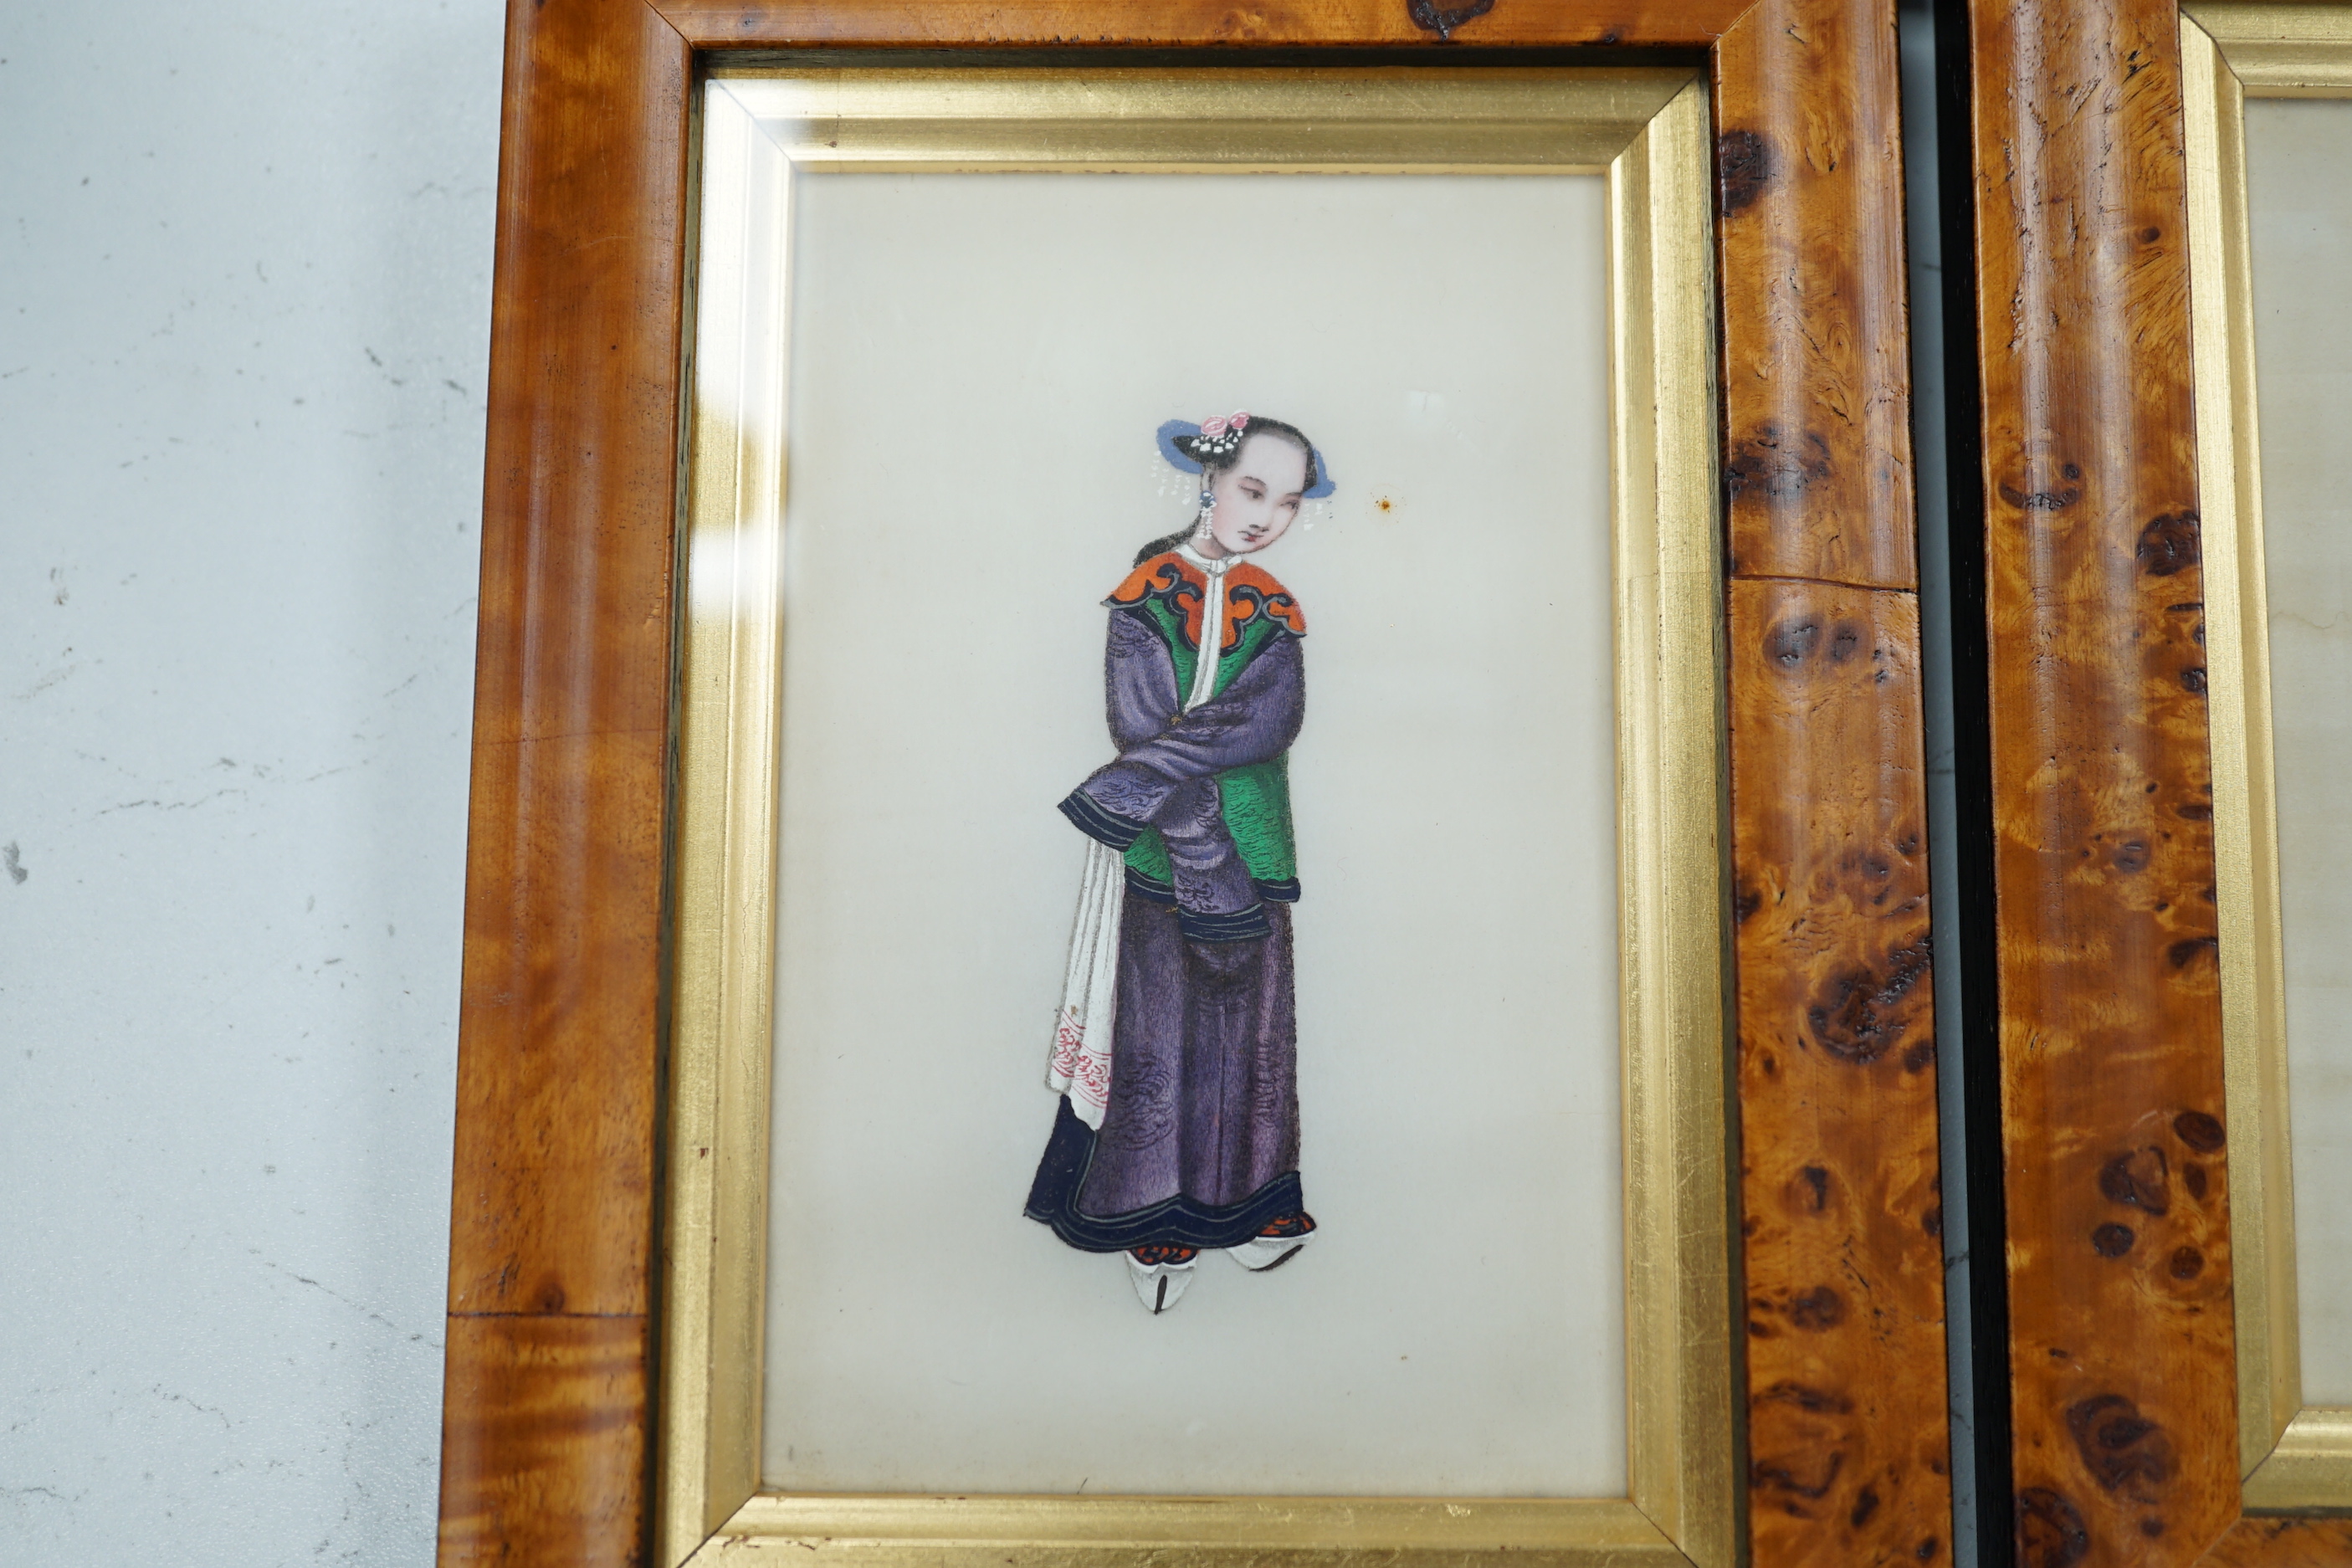 A set of six framed Chinese pith paper figure paintings, 9cm wide, 13cm high